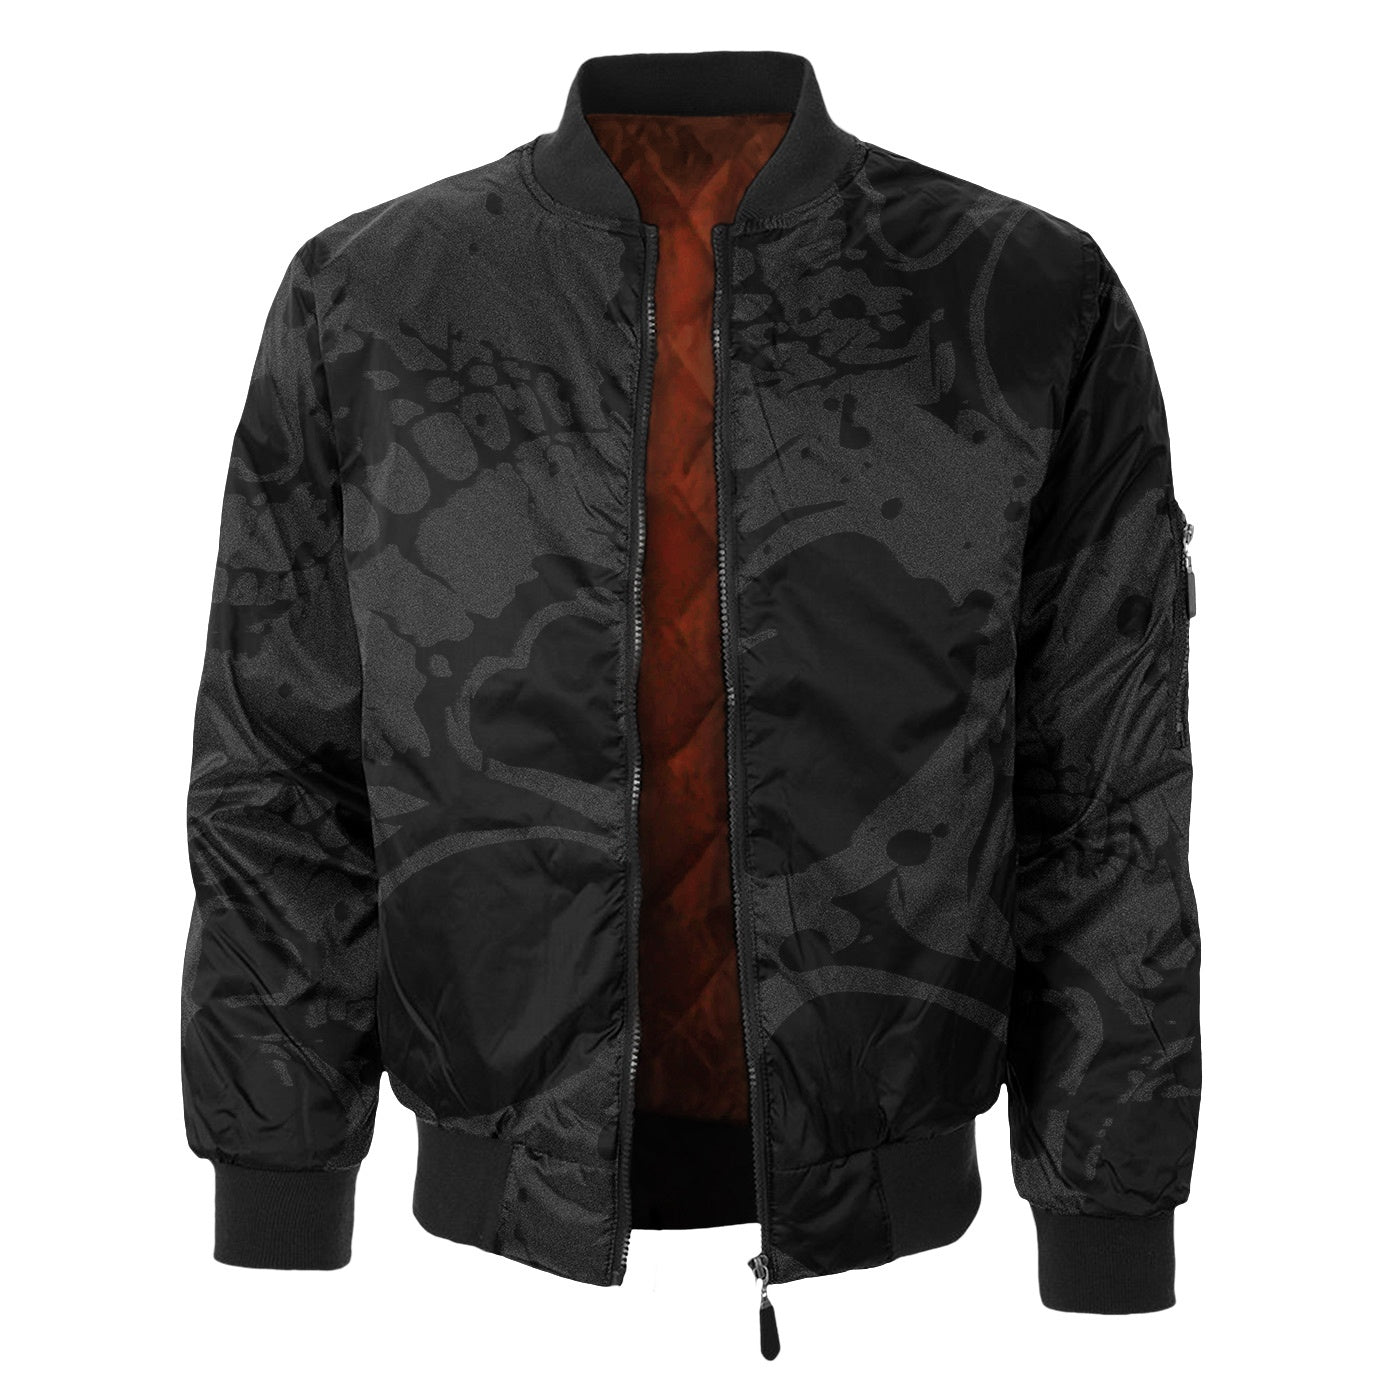 Infected Bomber Jacket